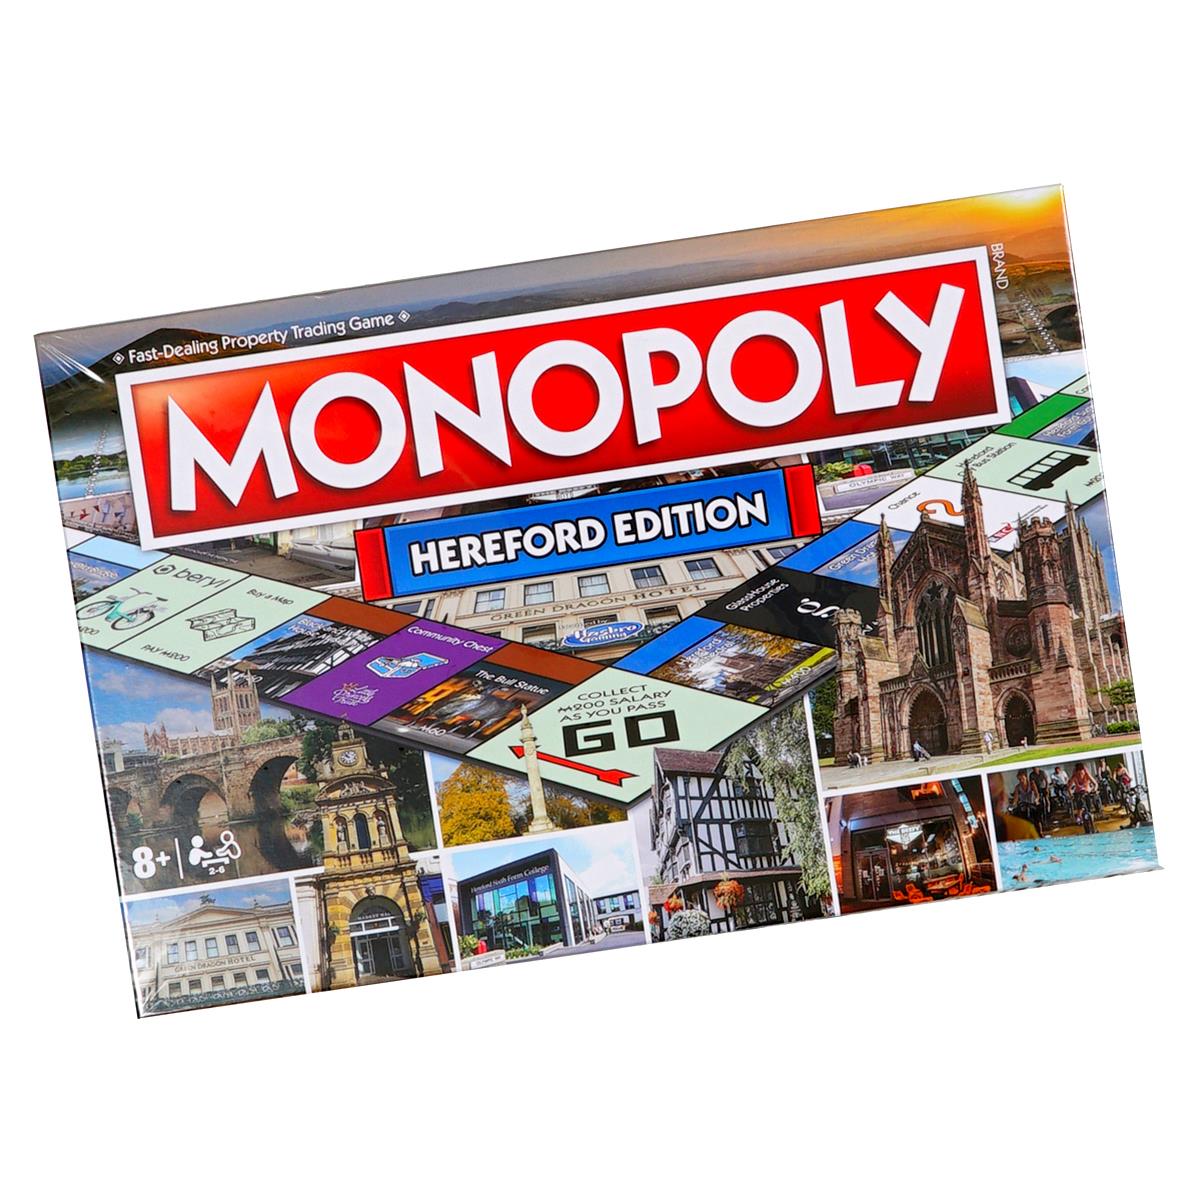 What utilities & modes of transport will hereford monopoly have?